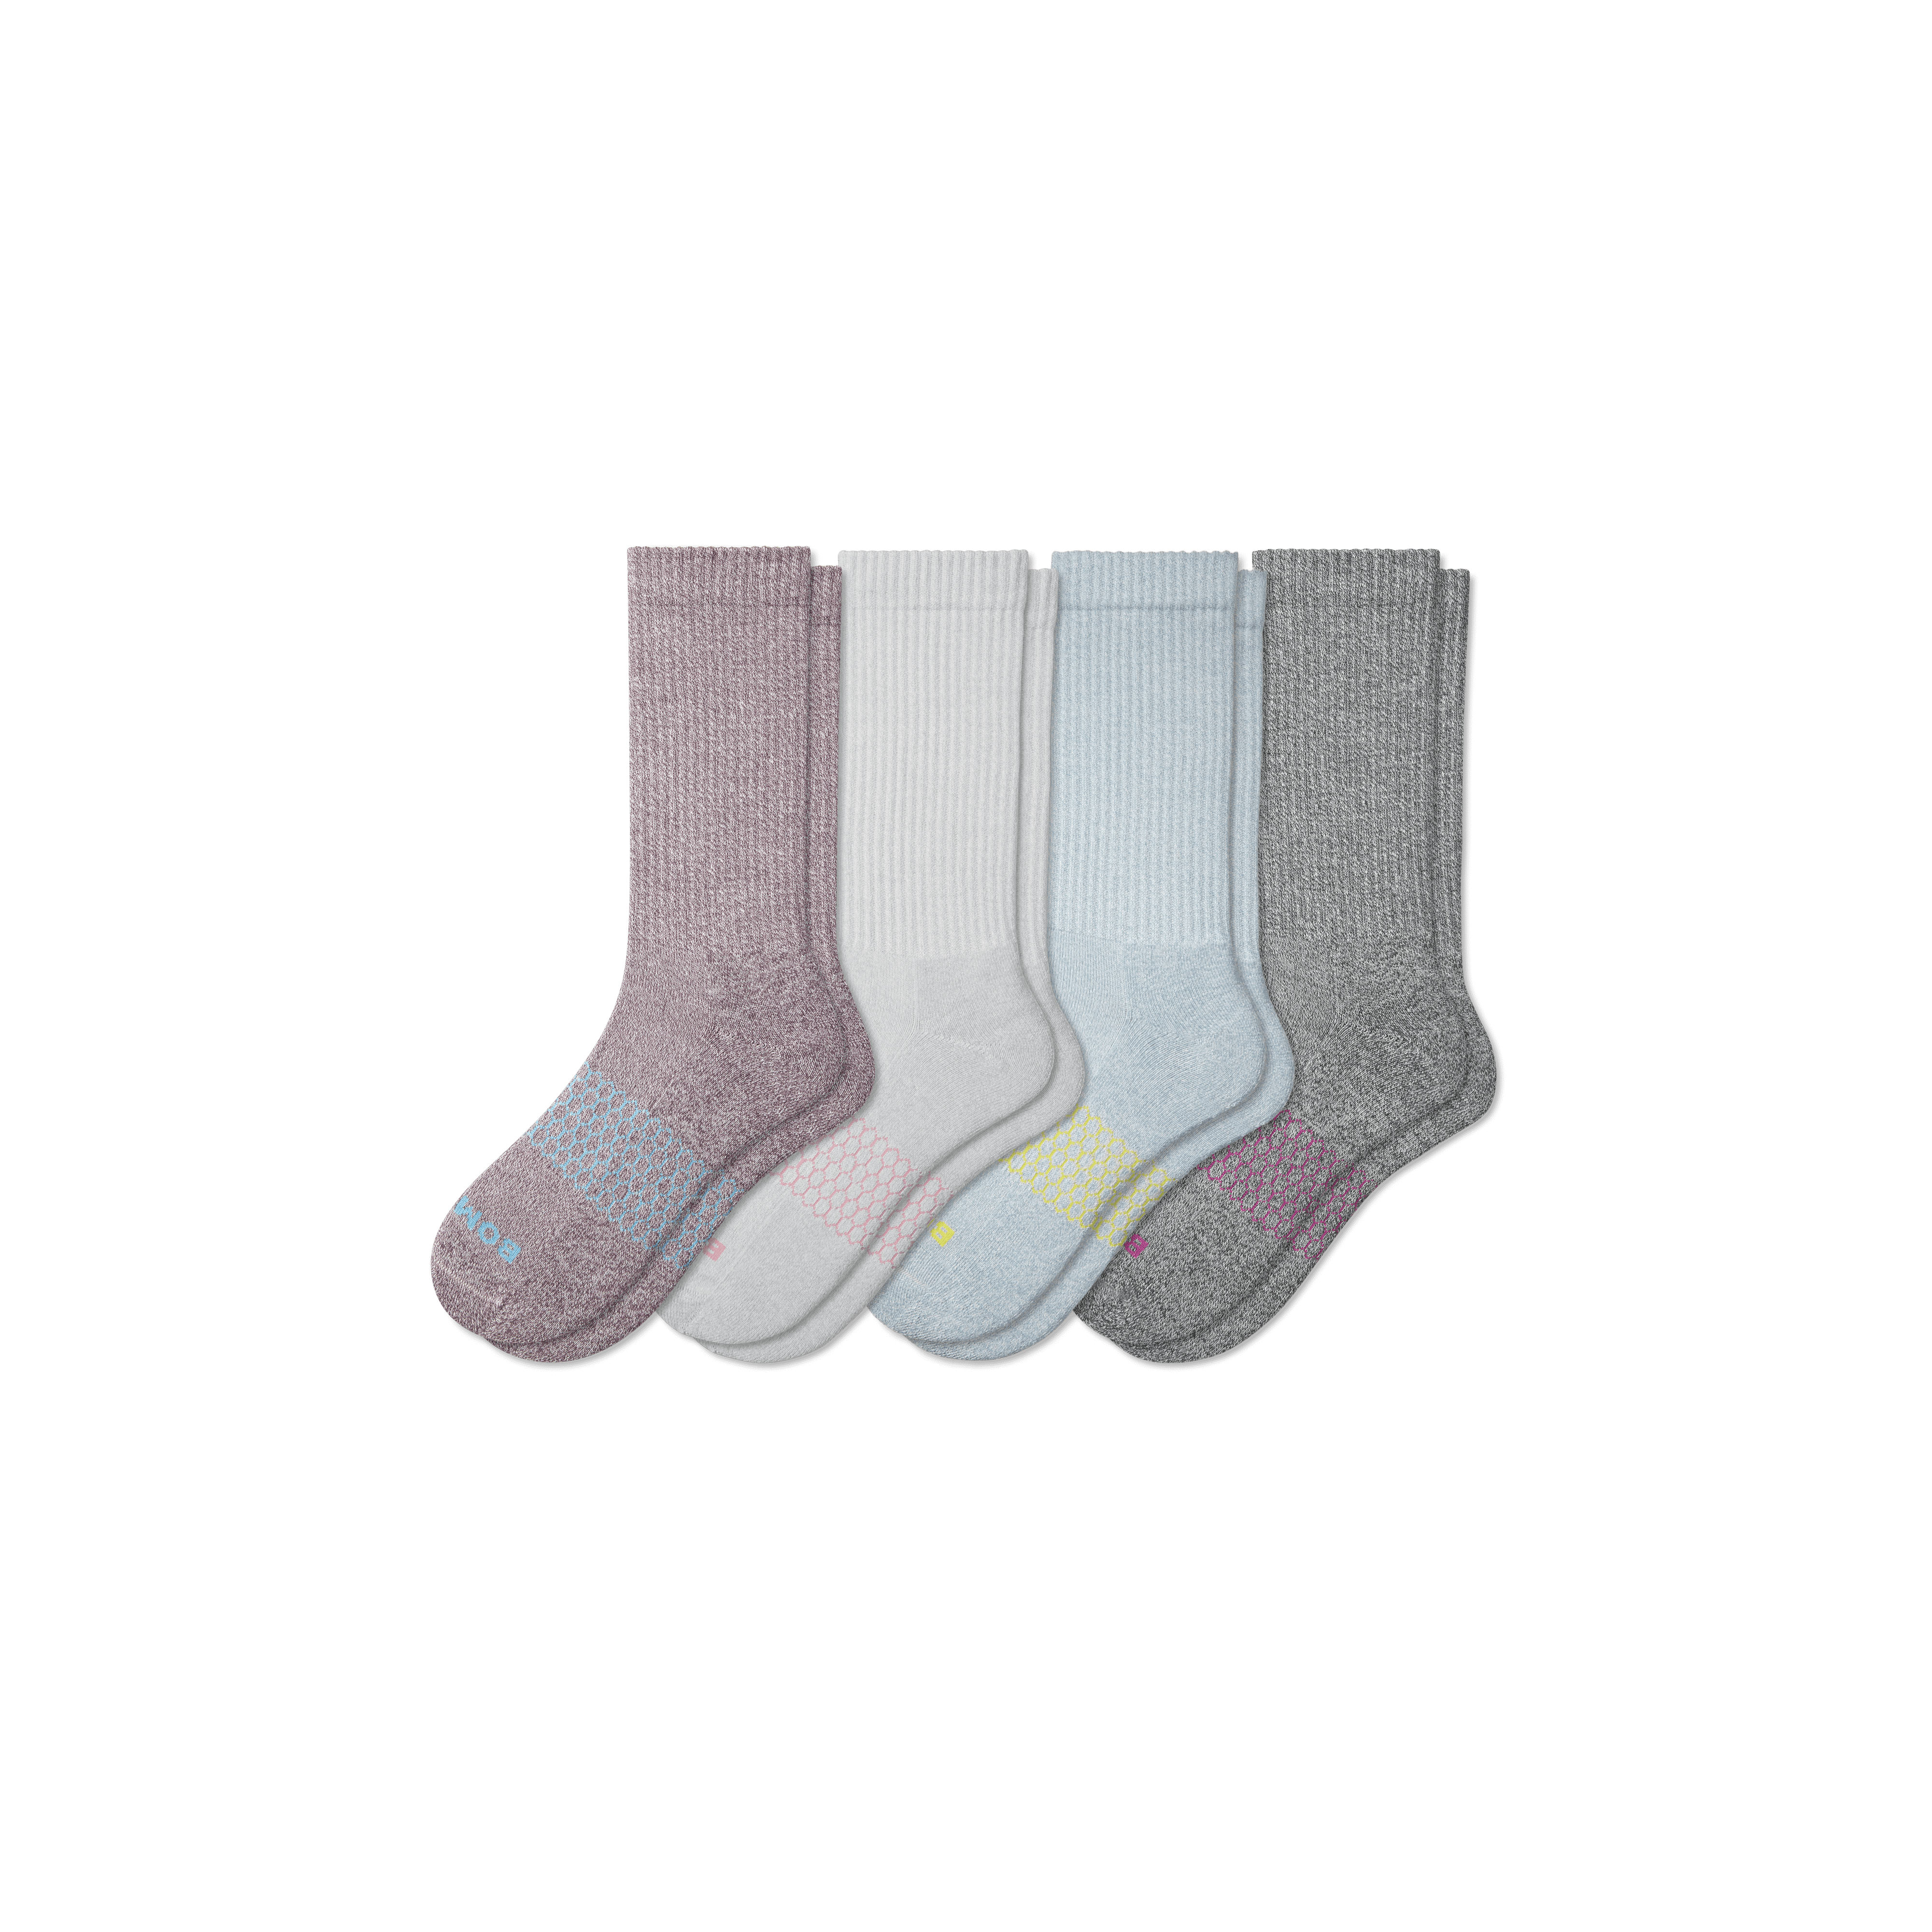 Bombas Women's 4 Pairs Gripper Calf Socks bee better Size Large 4 color Mix